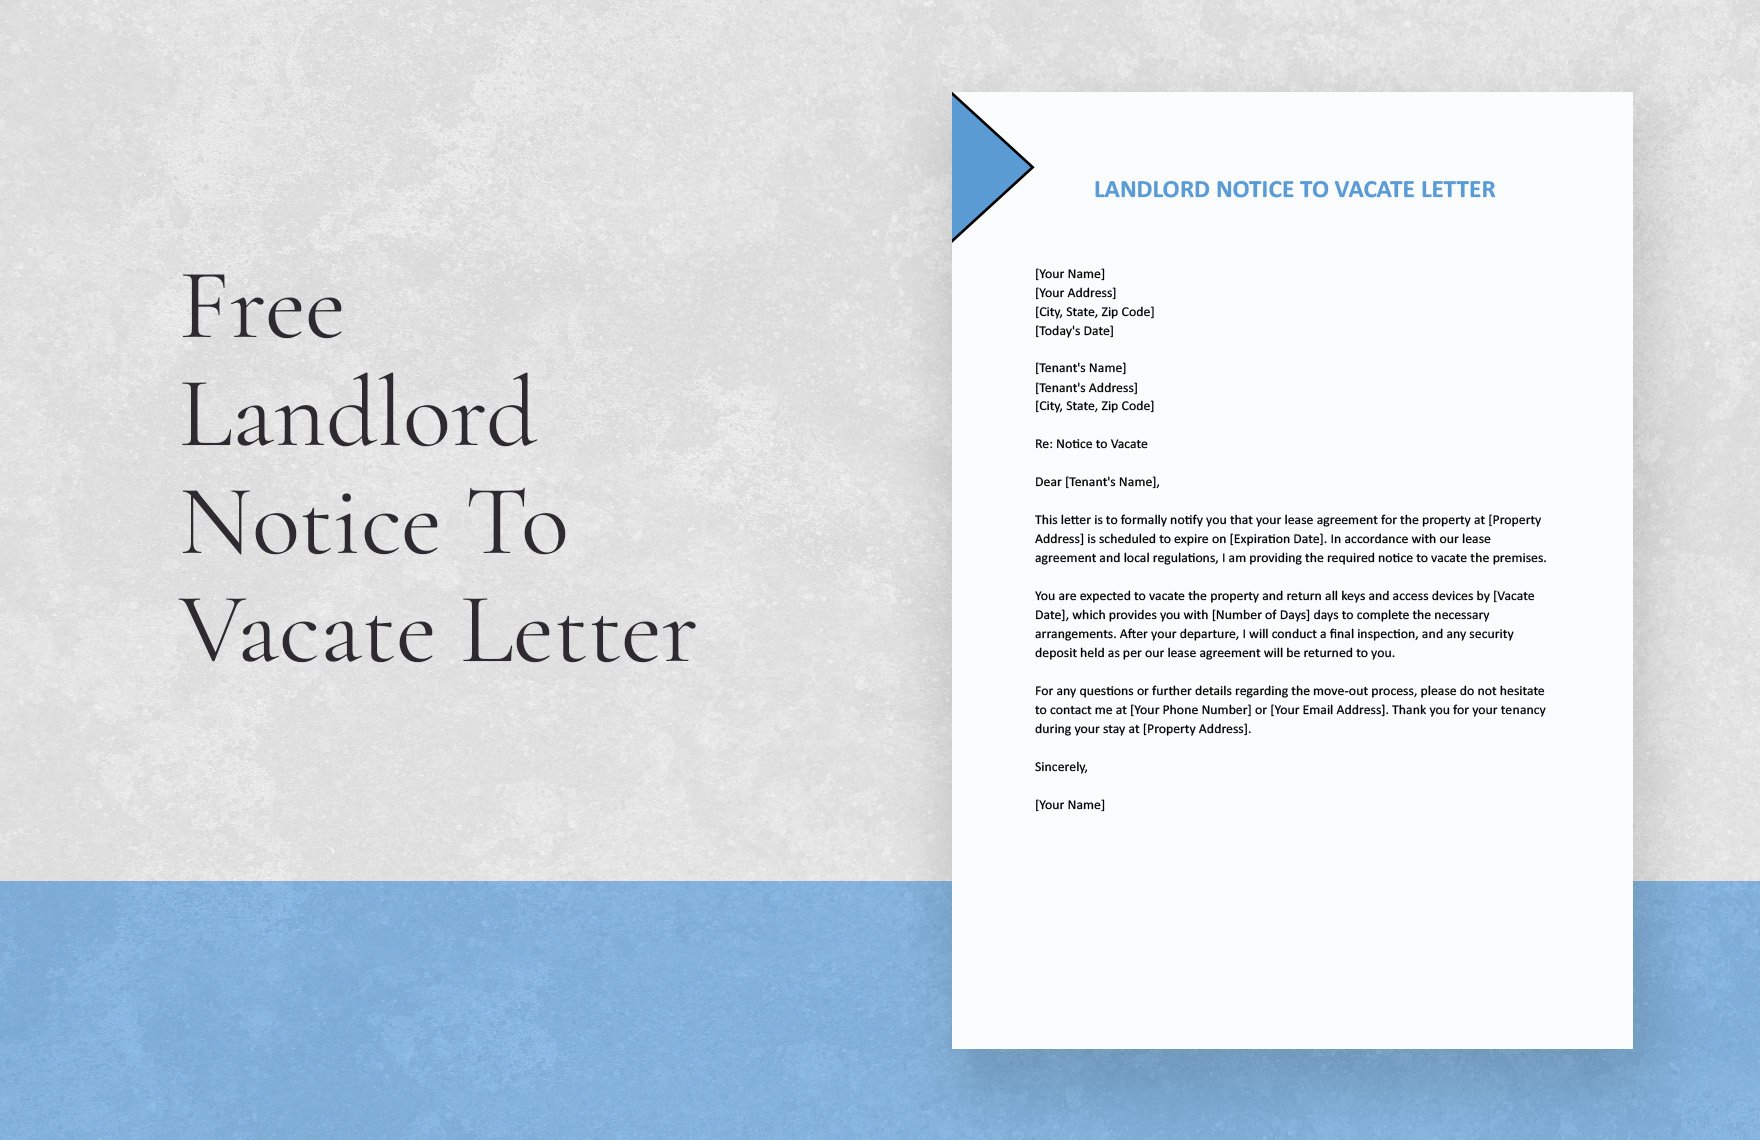 Landlord Notice To Vacate Letter